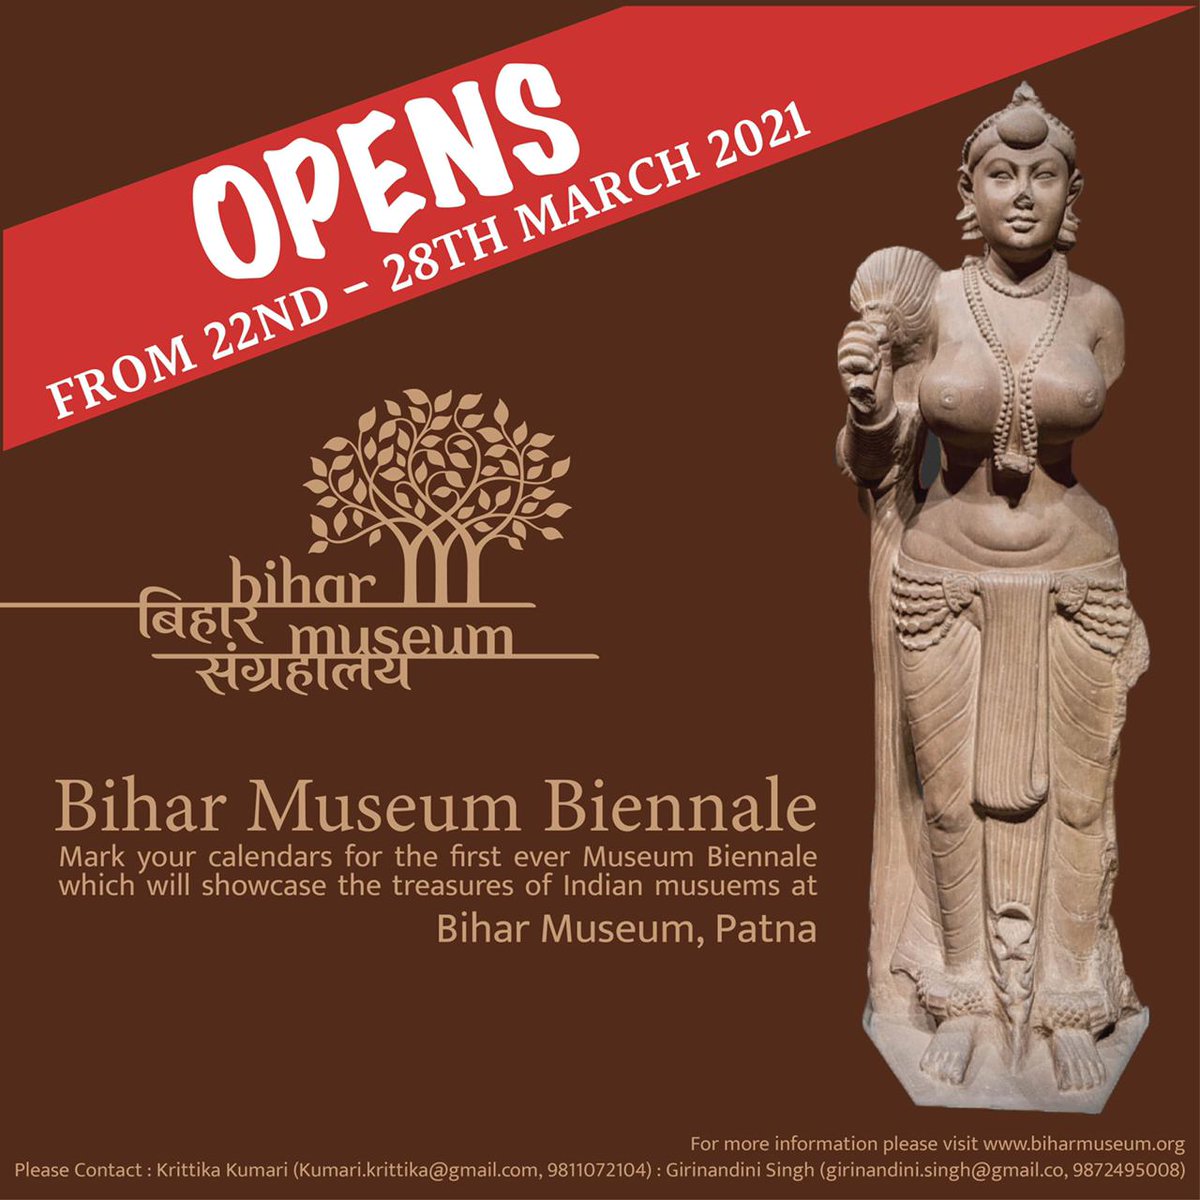 I am delighted that the Bihar Museum Biennale which was put in a back burner due to the pandemic is back to life. As the Project Director, it gives me great pleasure to share with all of you the opening of the Museum Biennale at Patna on 22nd March on the occasion of Bihar Diwas.